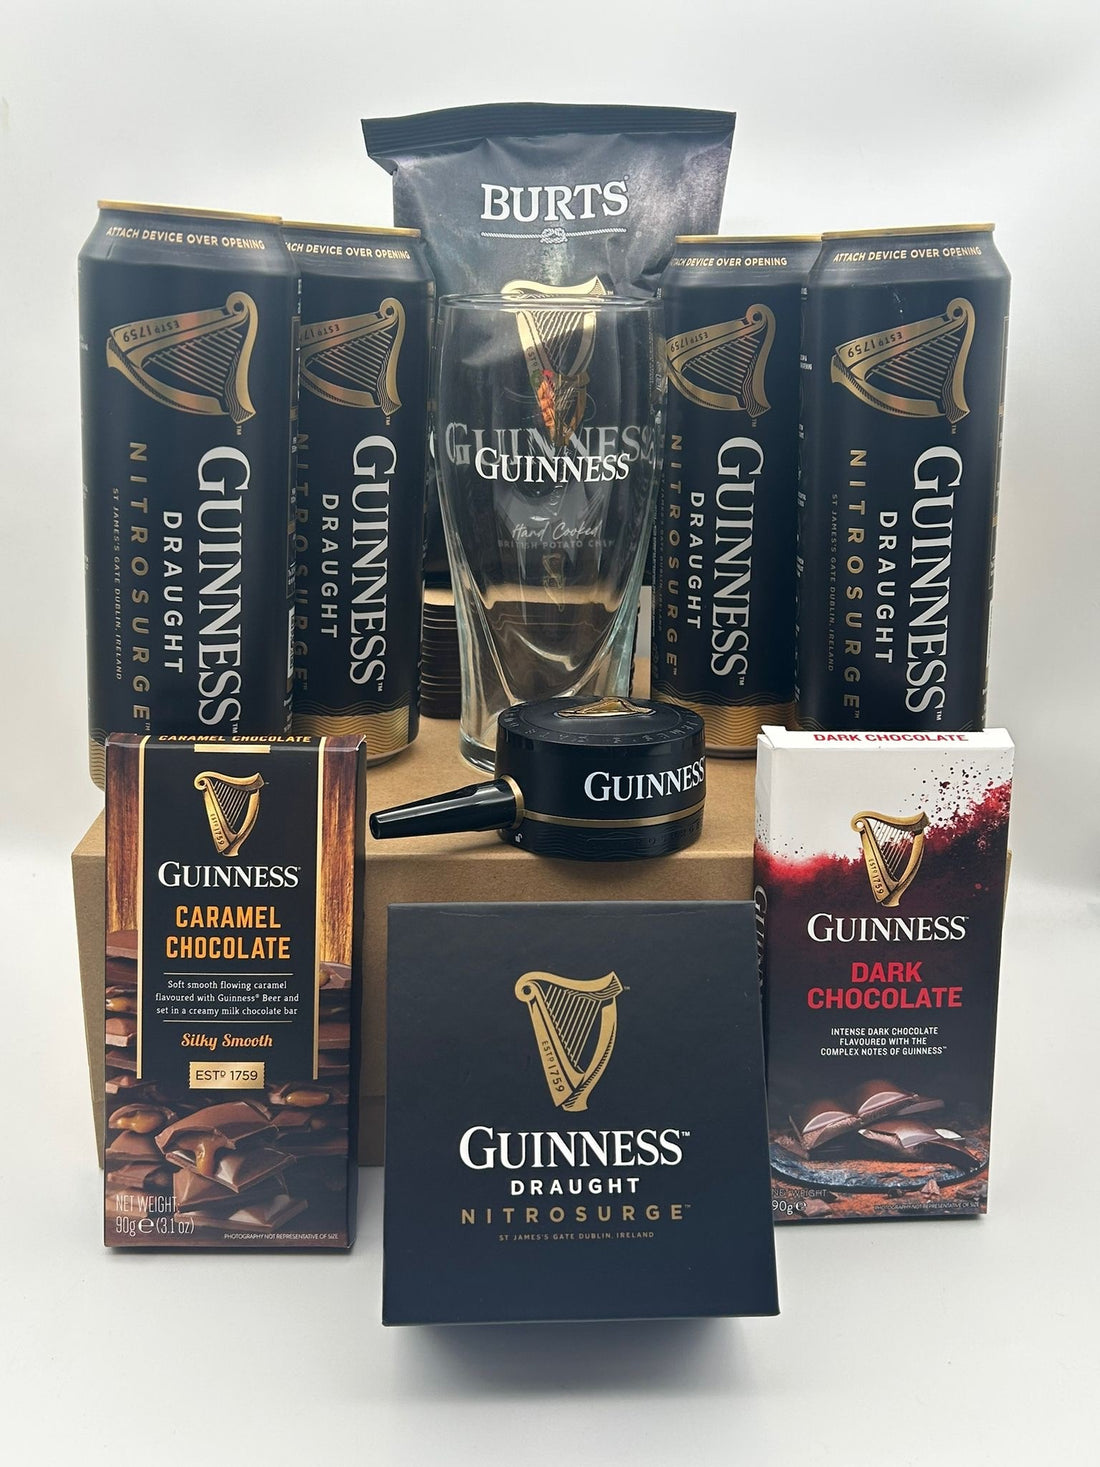 Introducing the Guinness NITROSURGE!